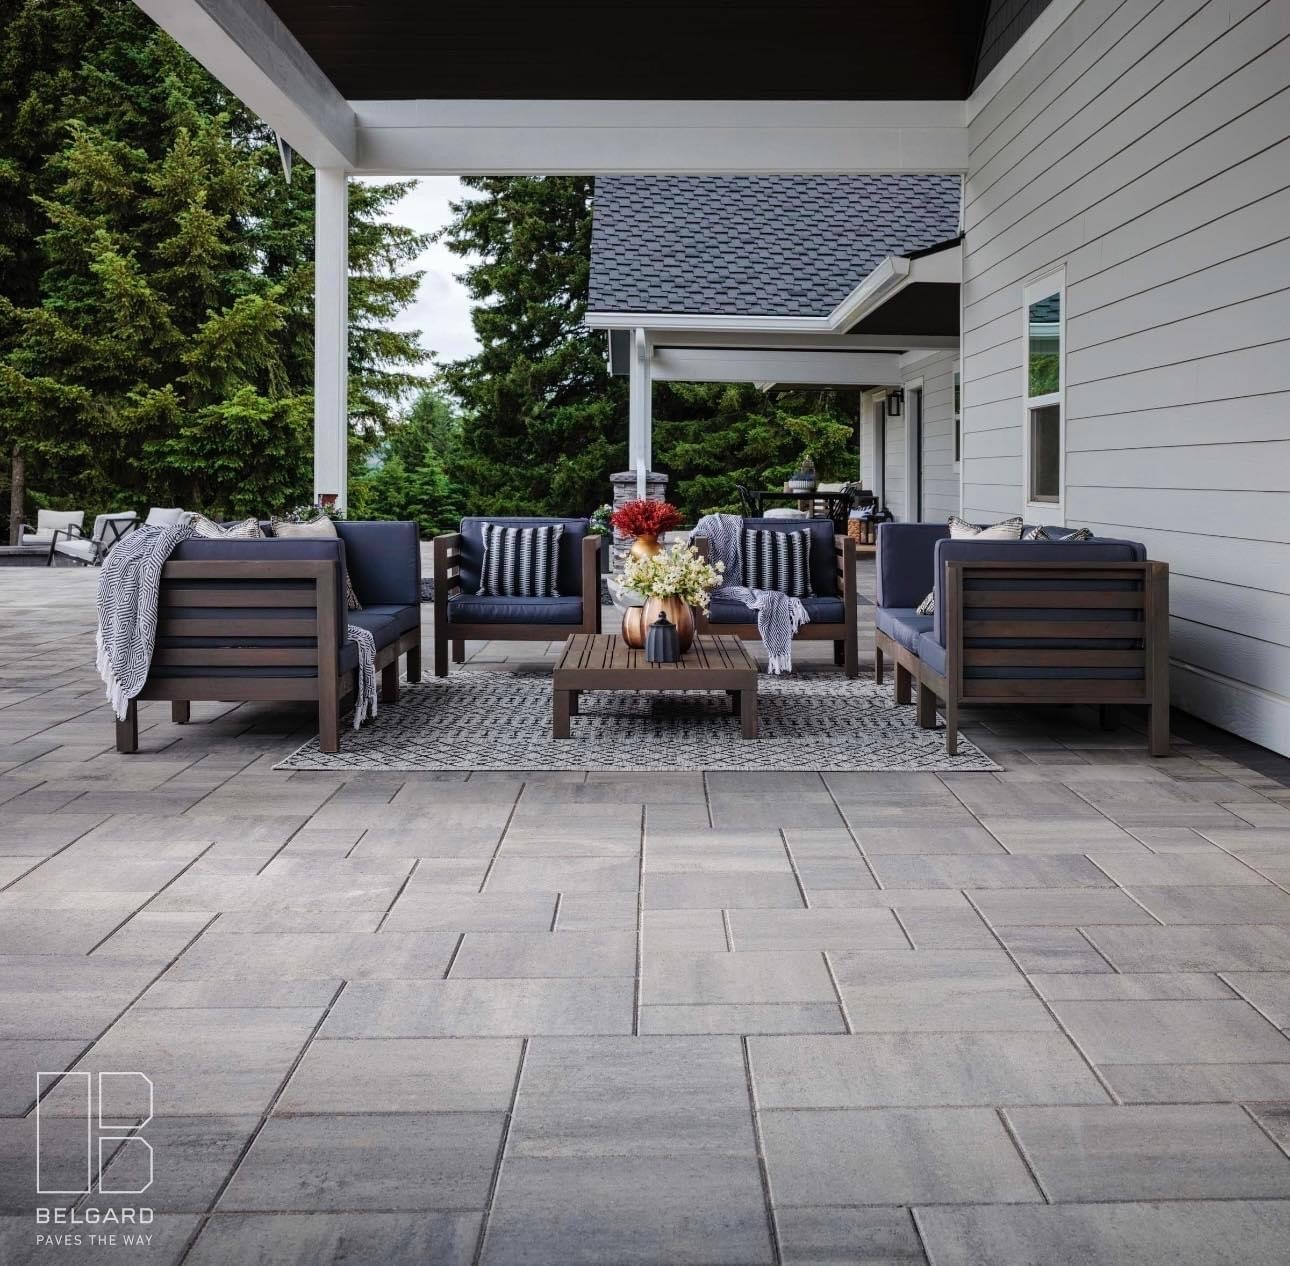 Advantages of Working with a Belgard Master Craftsman